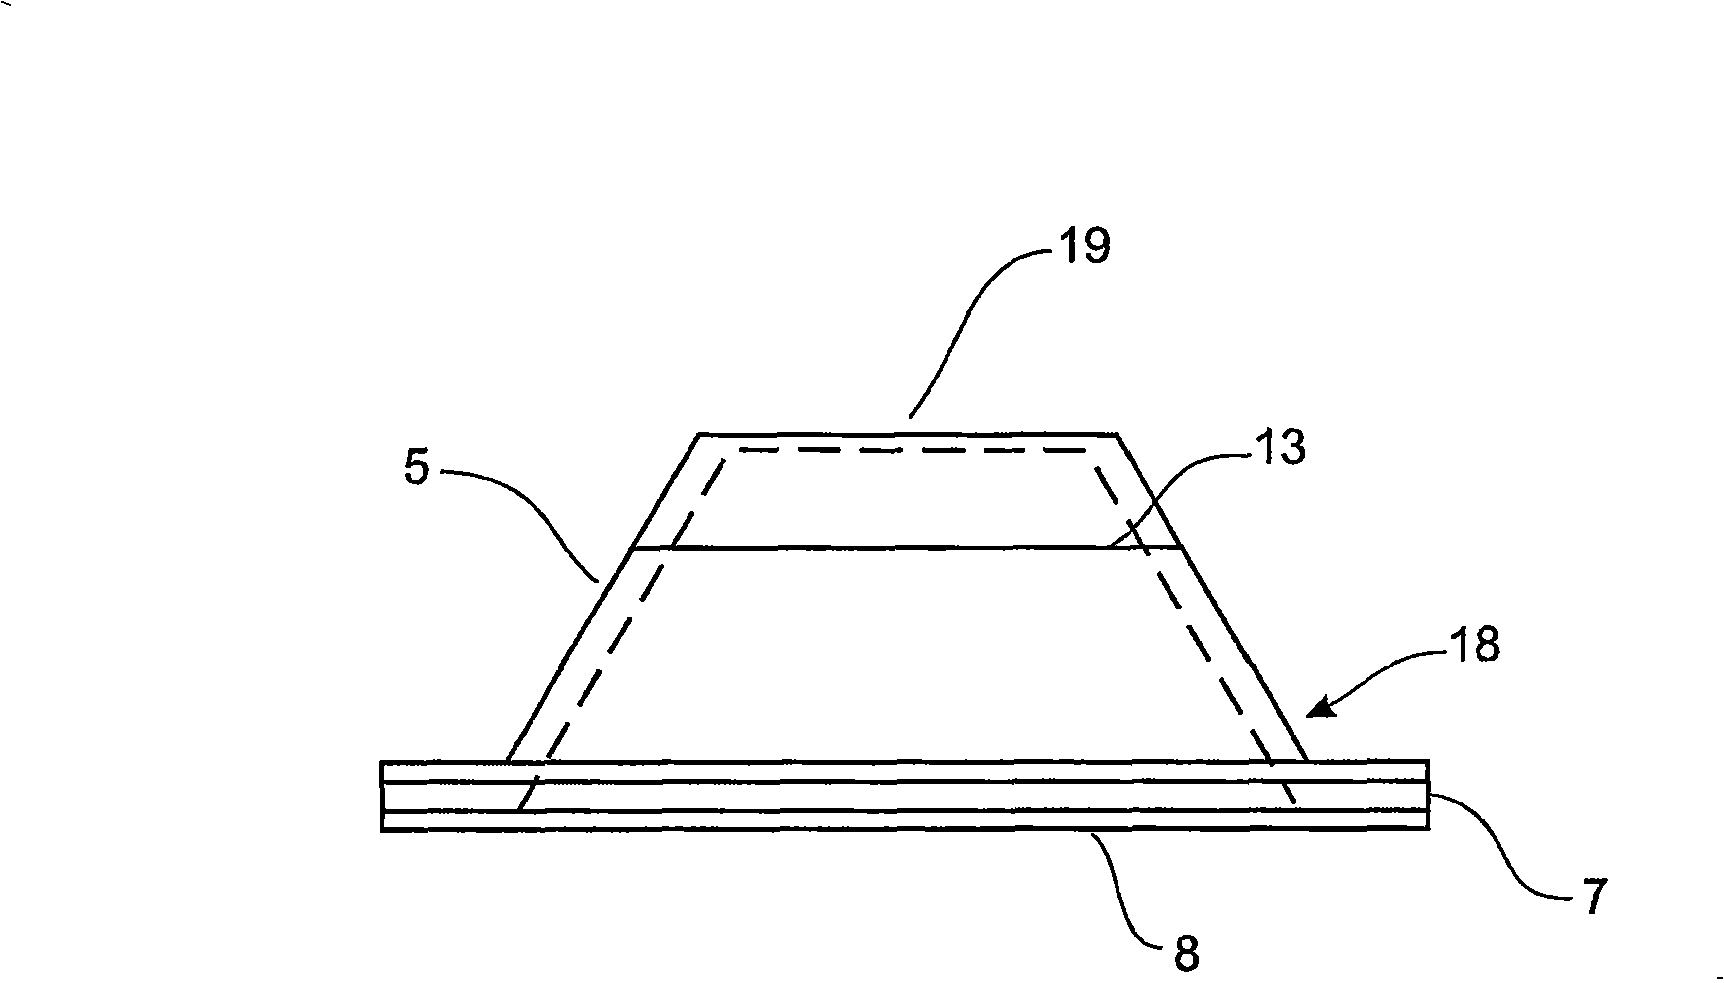 A peripheral sealing gland for elongate objects passing through a surface or beyond a pipe end